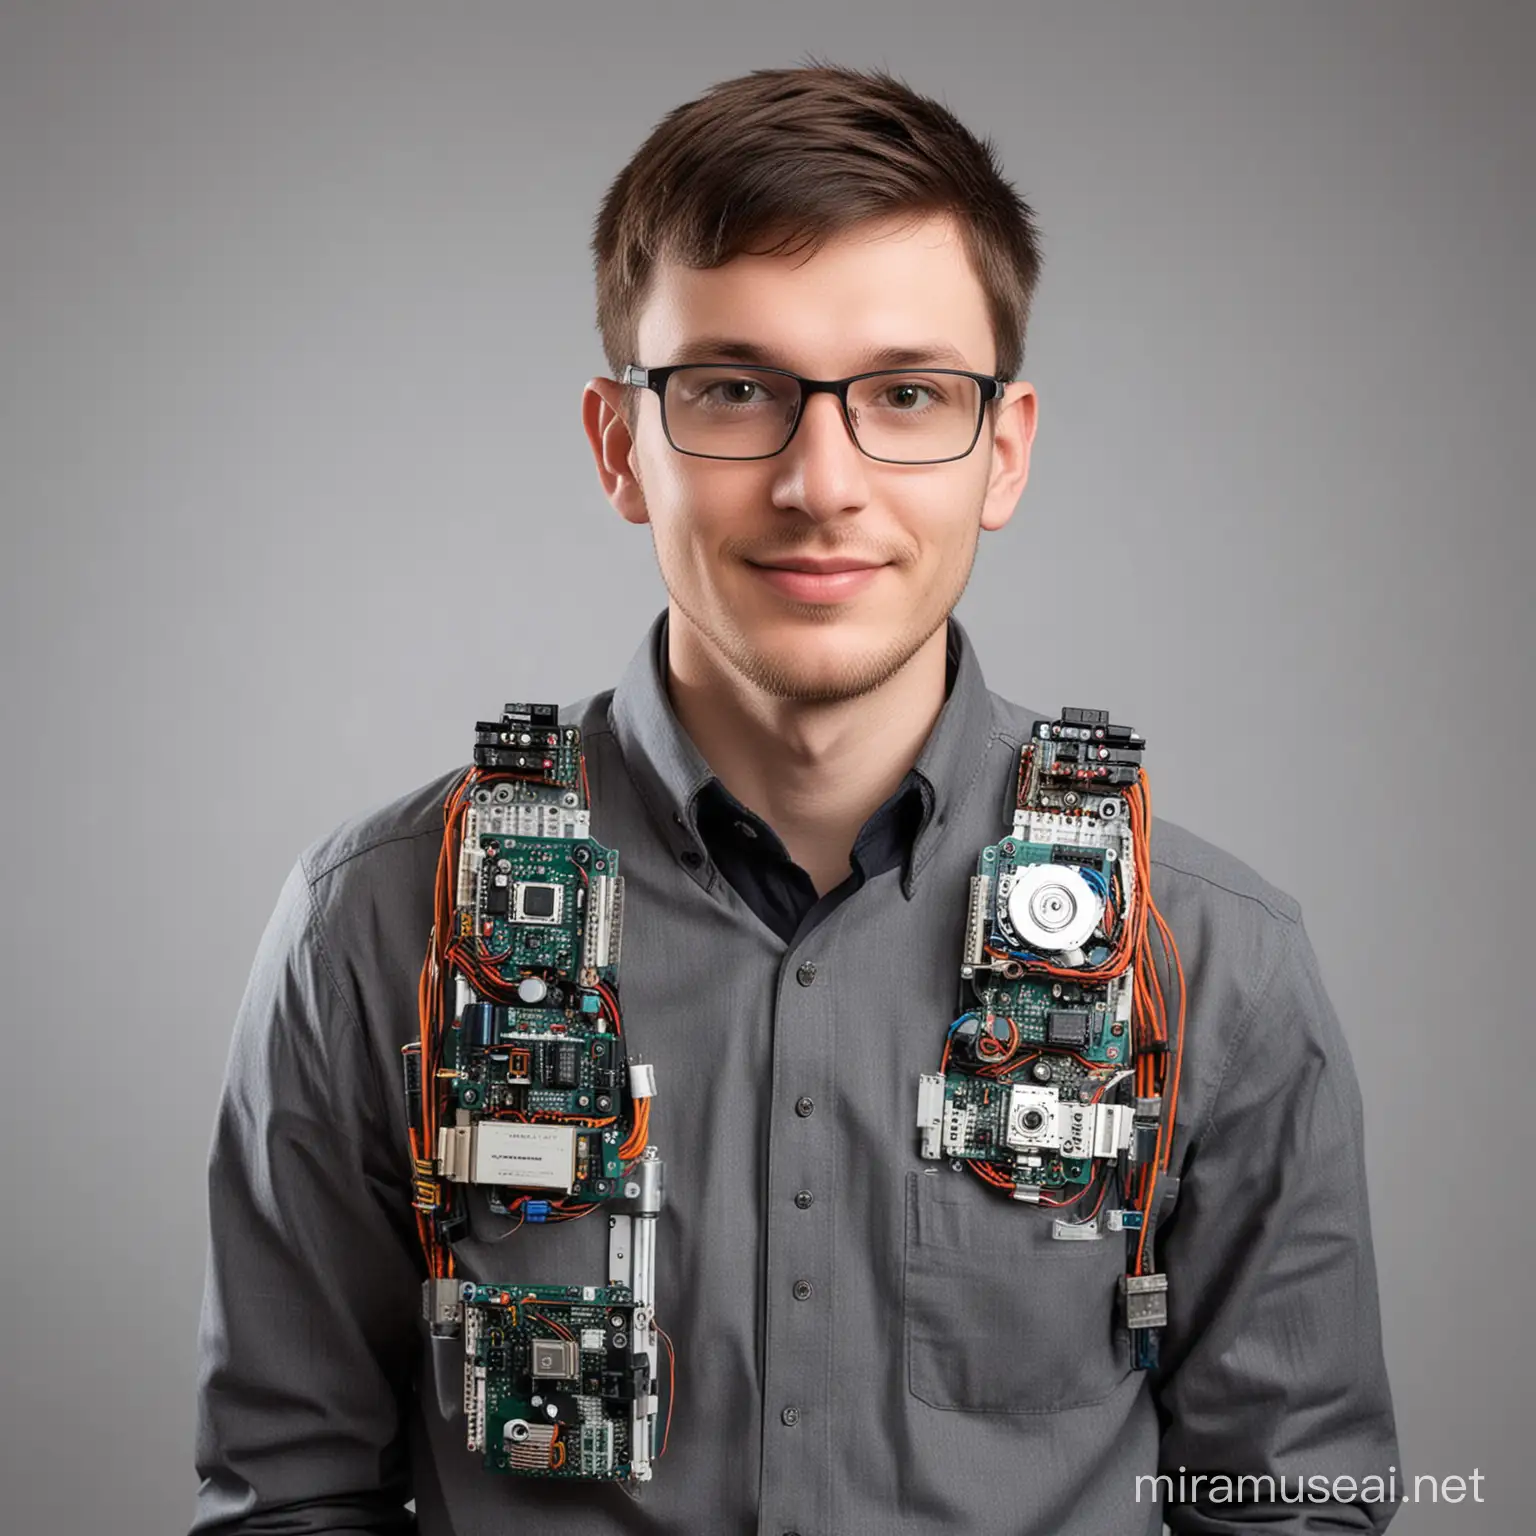 Curious Mechatronics Engineer Exploring Complex Systems